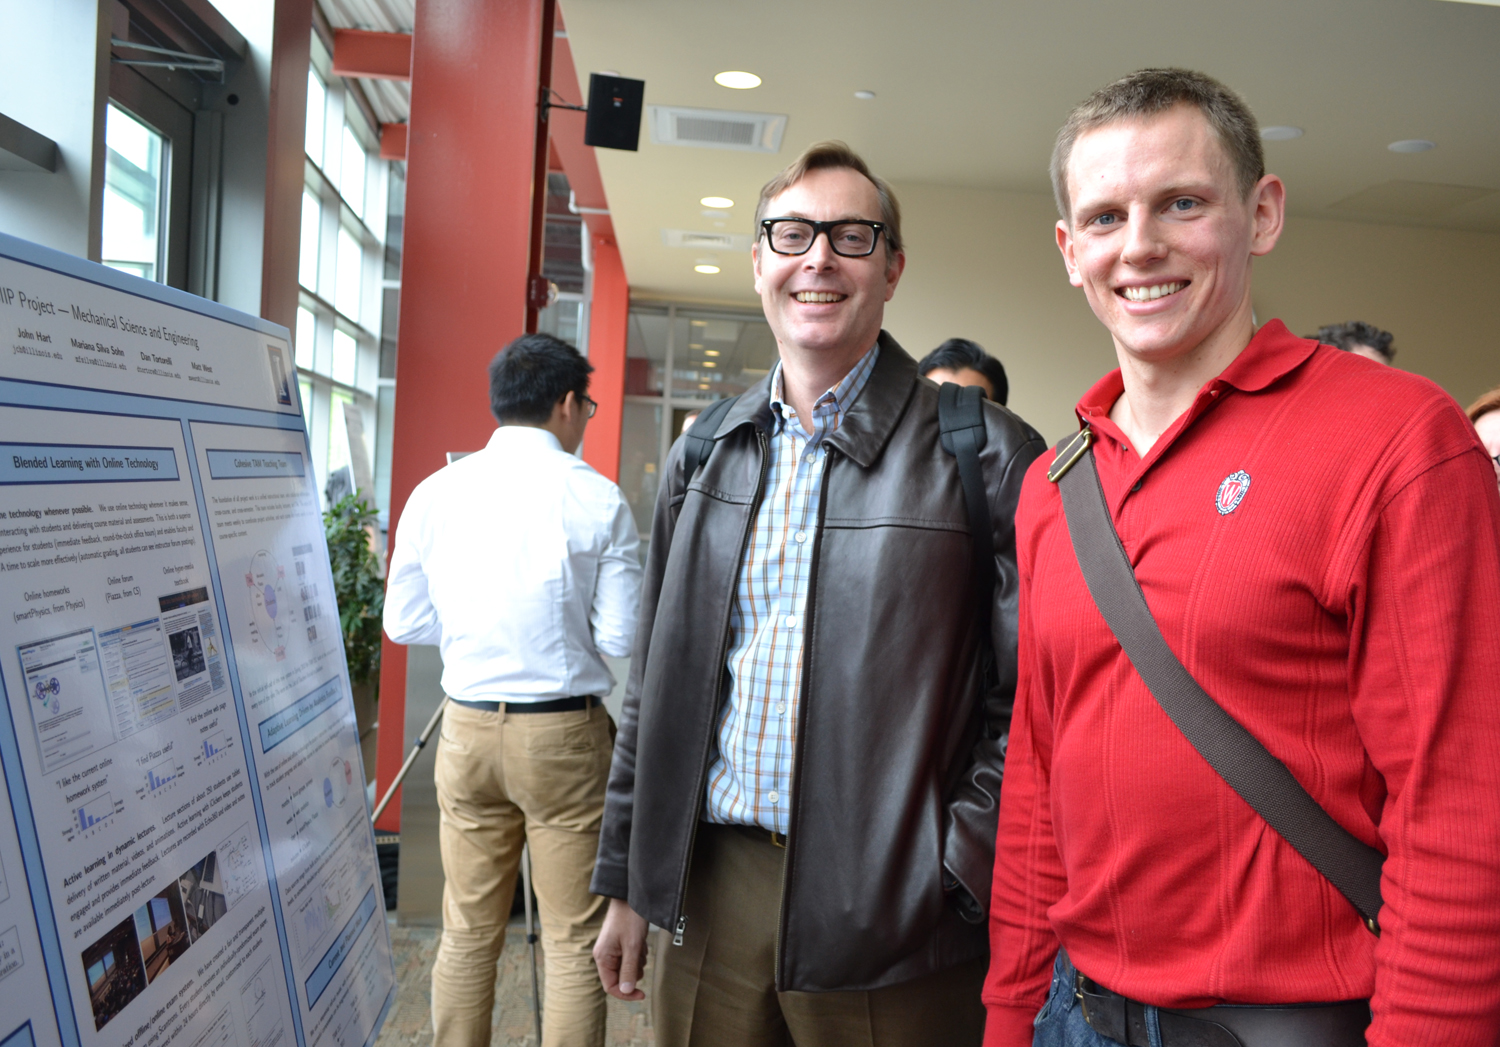 MechSE Professor Geir Dullerud and grad student Aaron Anderson from the TAM SIIP team.